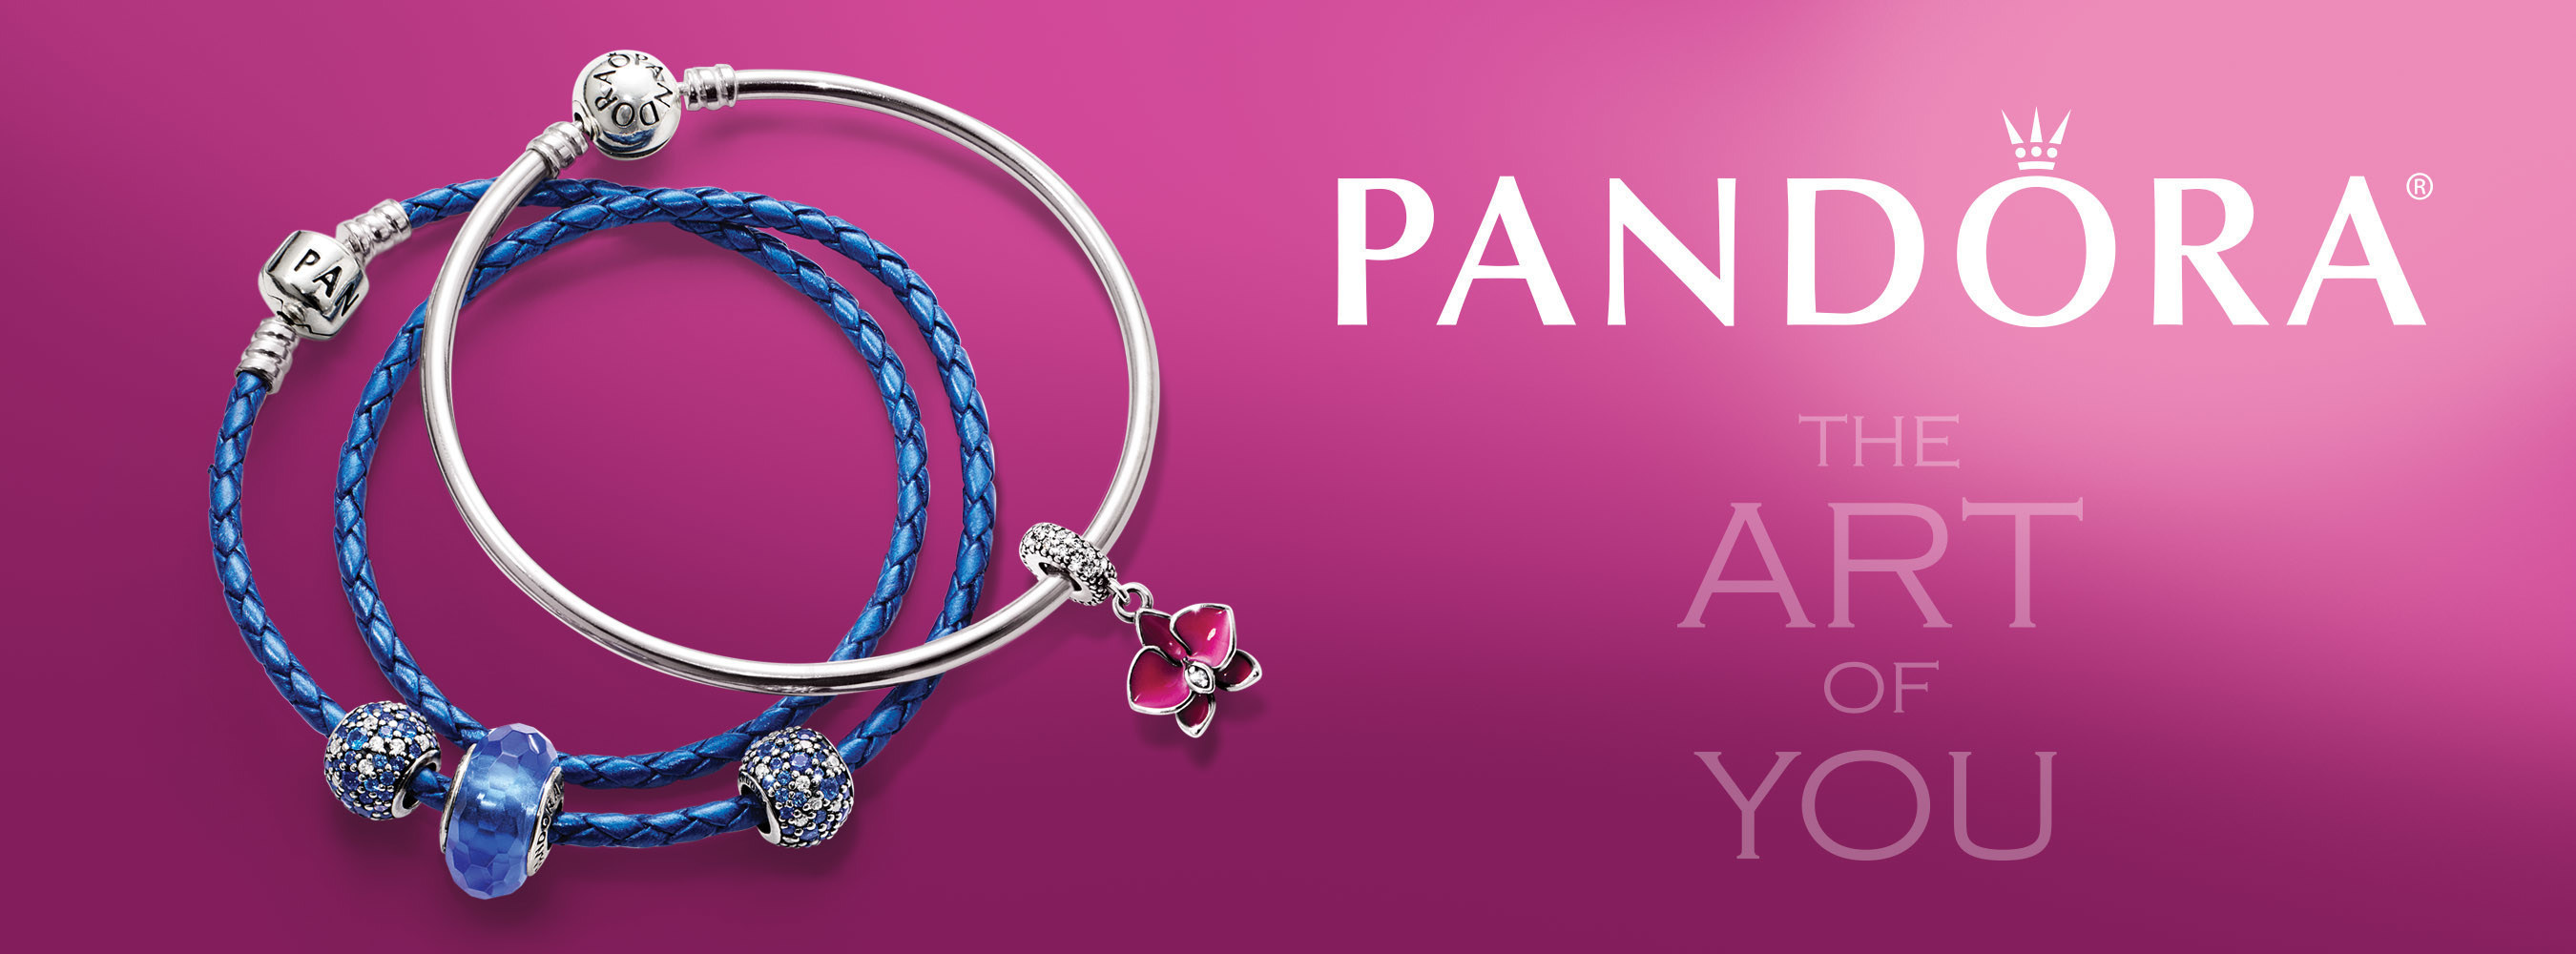 PANDORA Jewelry's Summer 2015 Collection